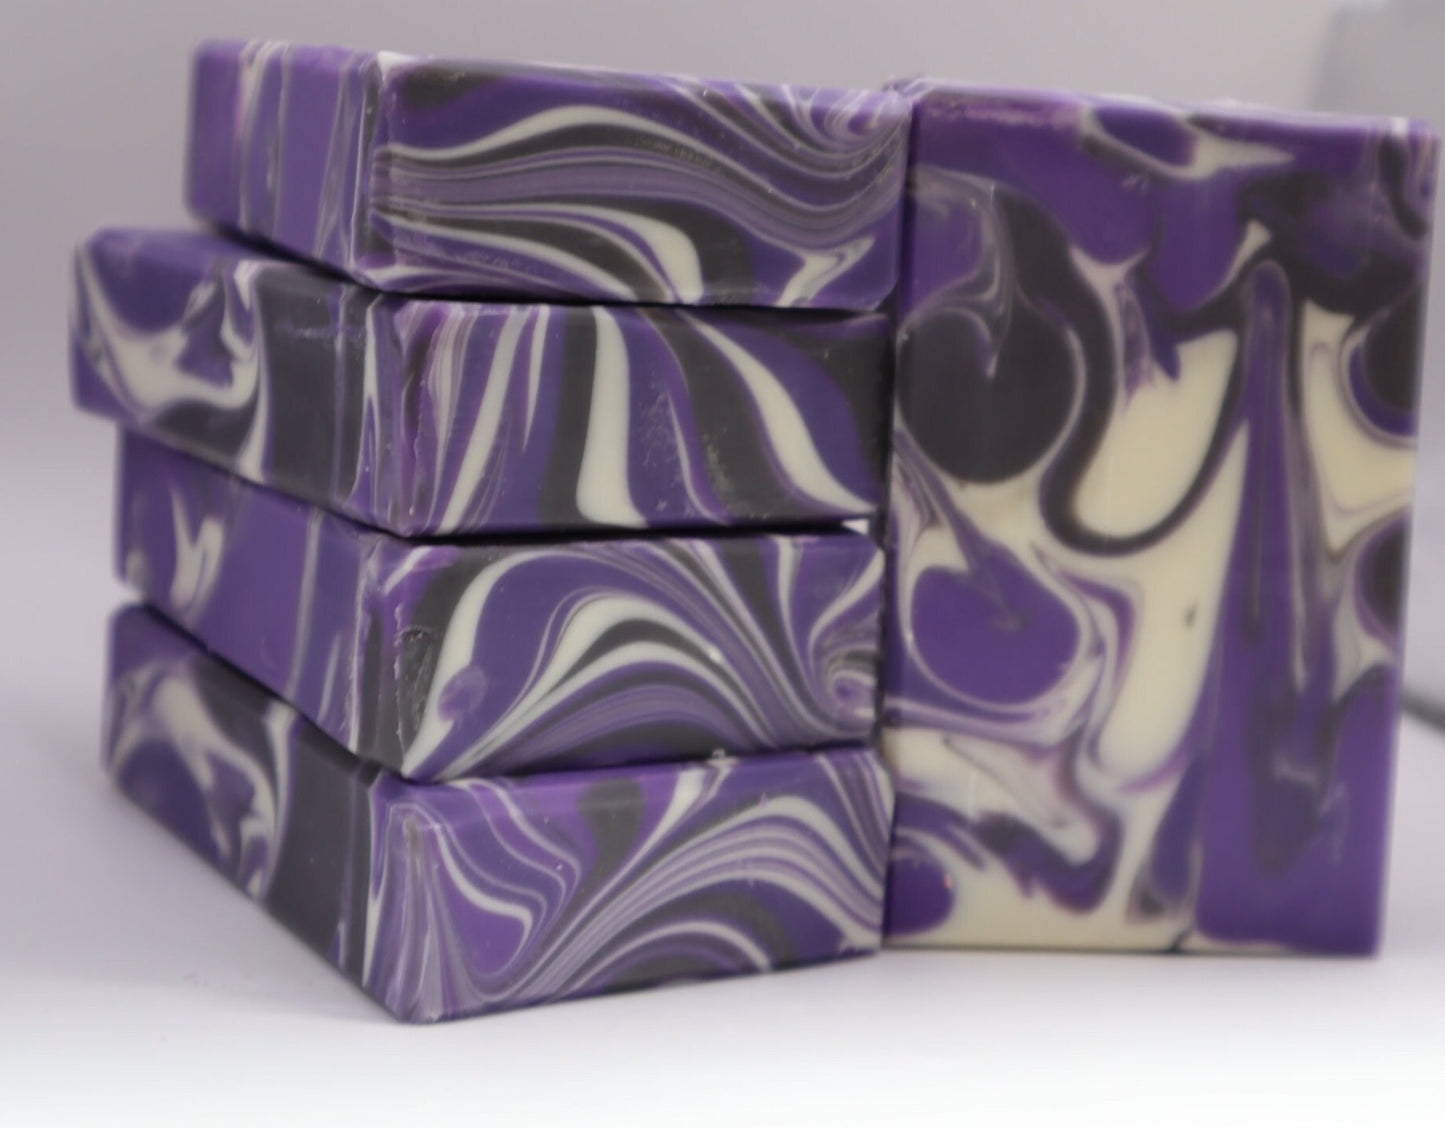 Pow! Pow! Lavender, Bold Colors and the subtle scent of Lavender with lather galore for your cleansing enjoyment 5.0 oz. Long lasting!